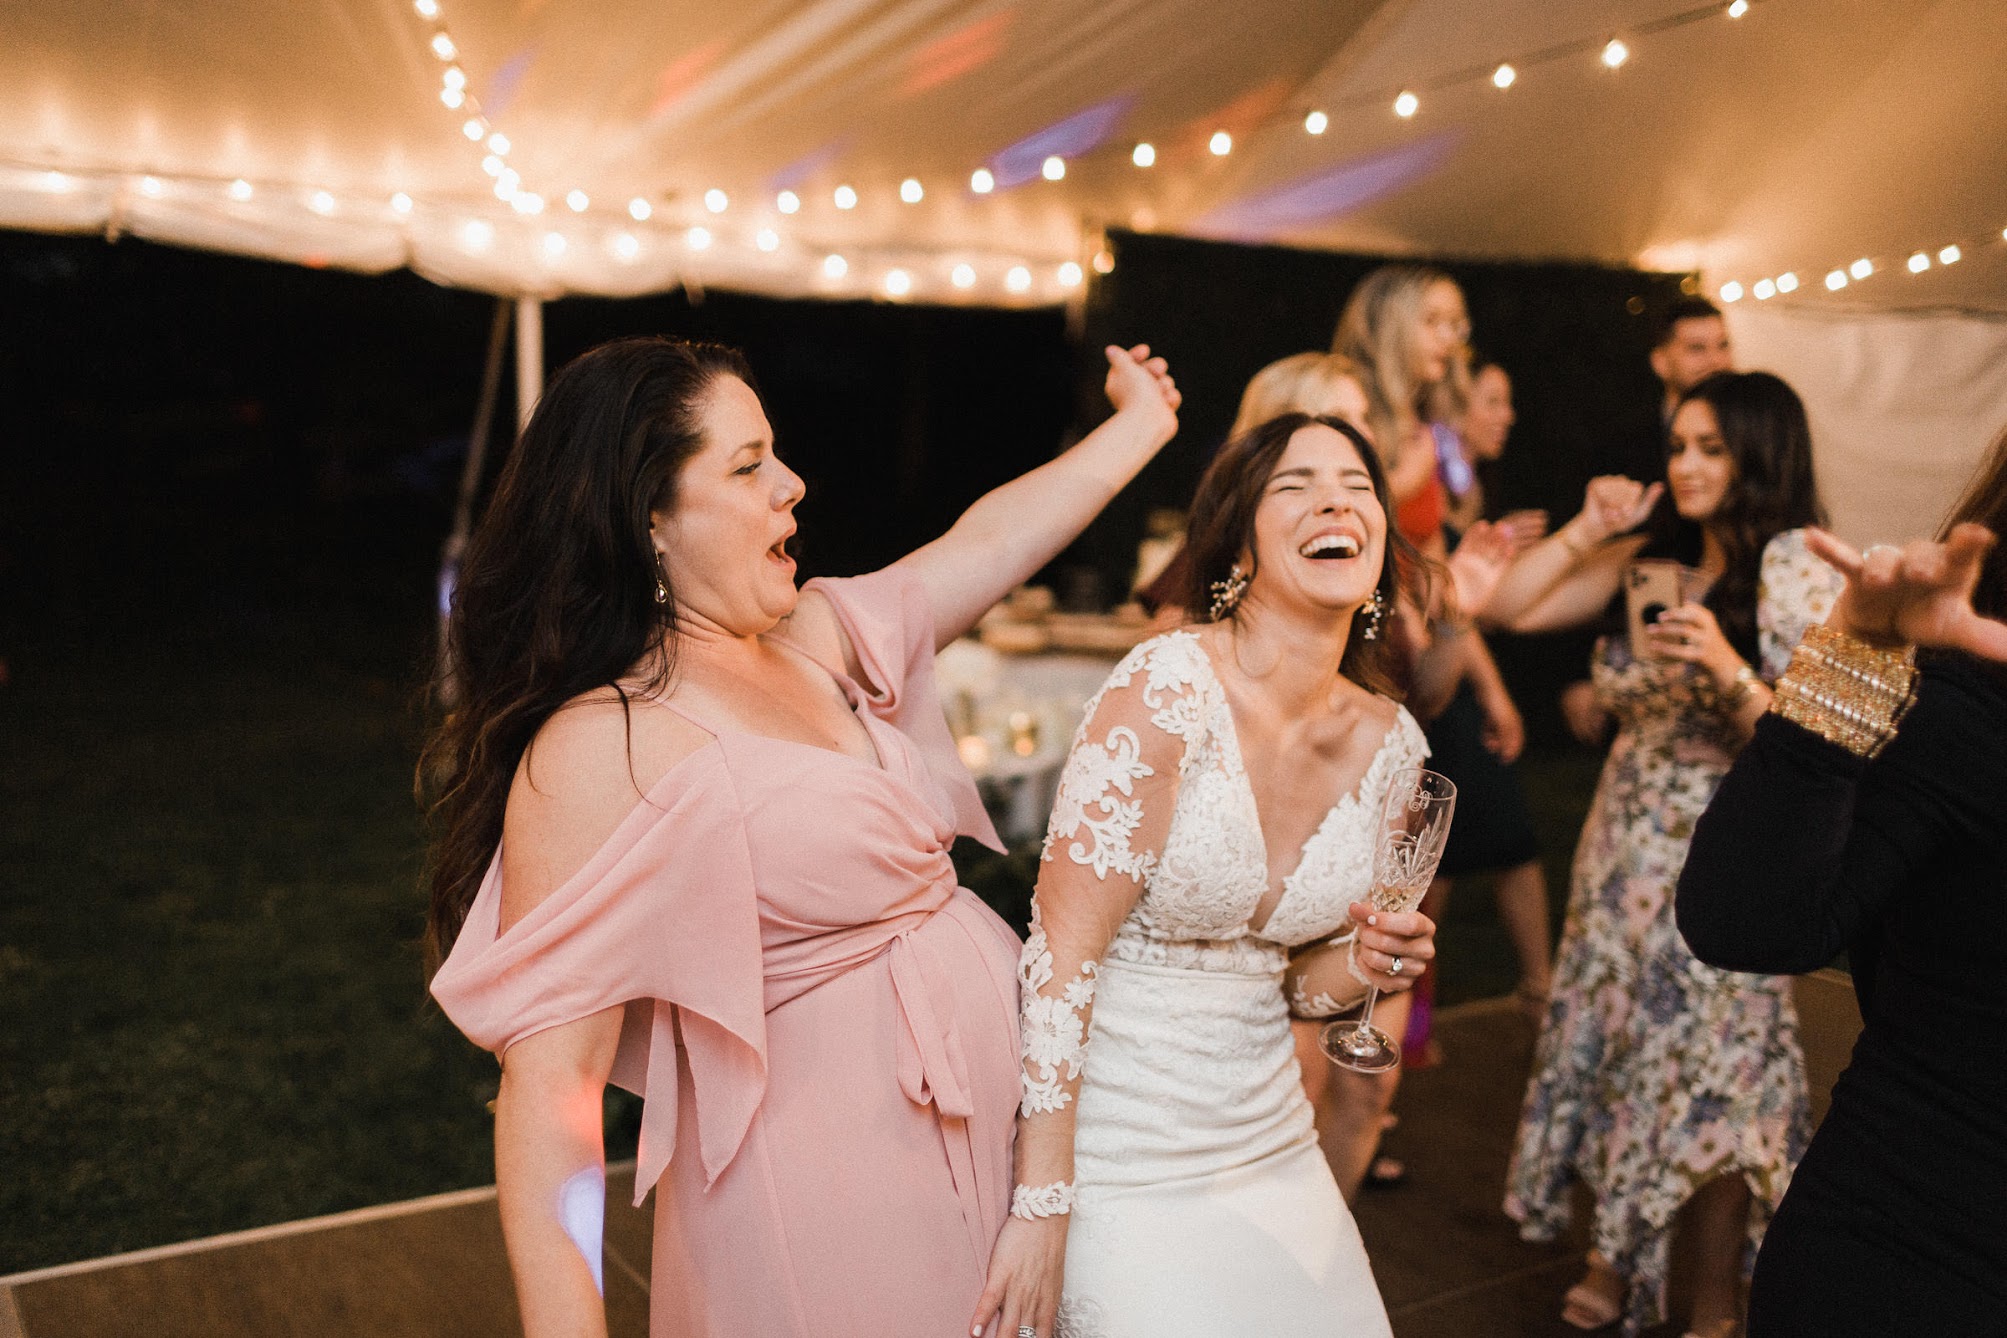 bride dancing with her maid of honor, bumping with hips together, laughing.